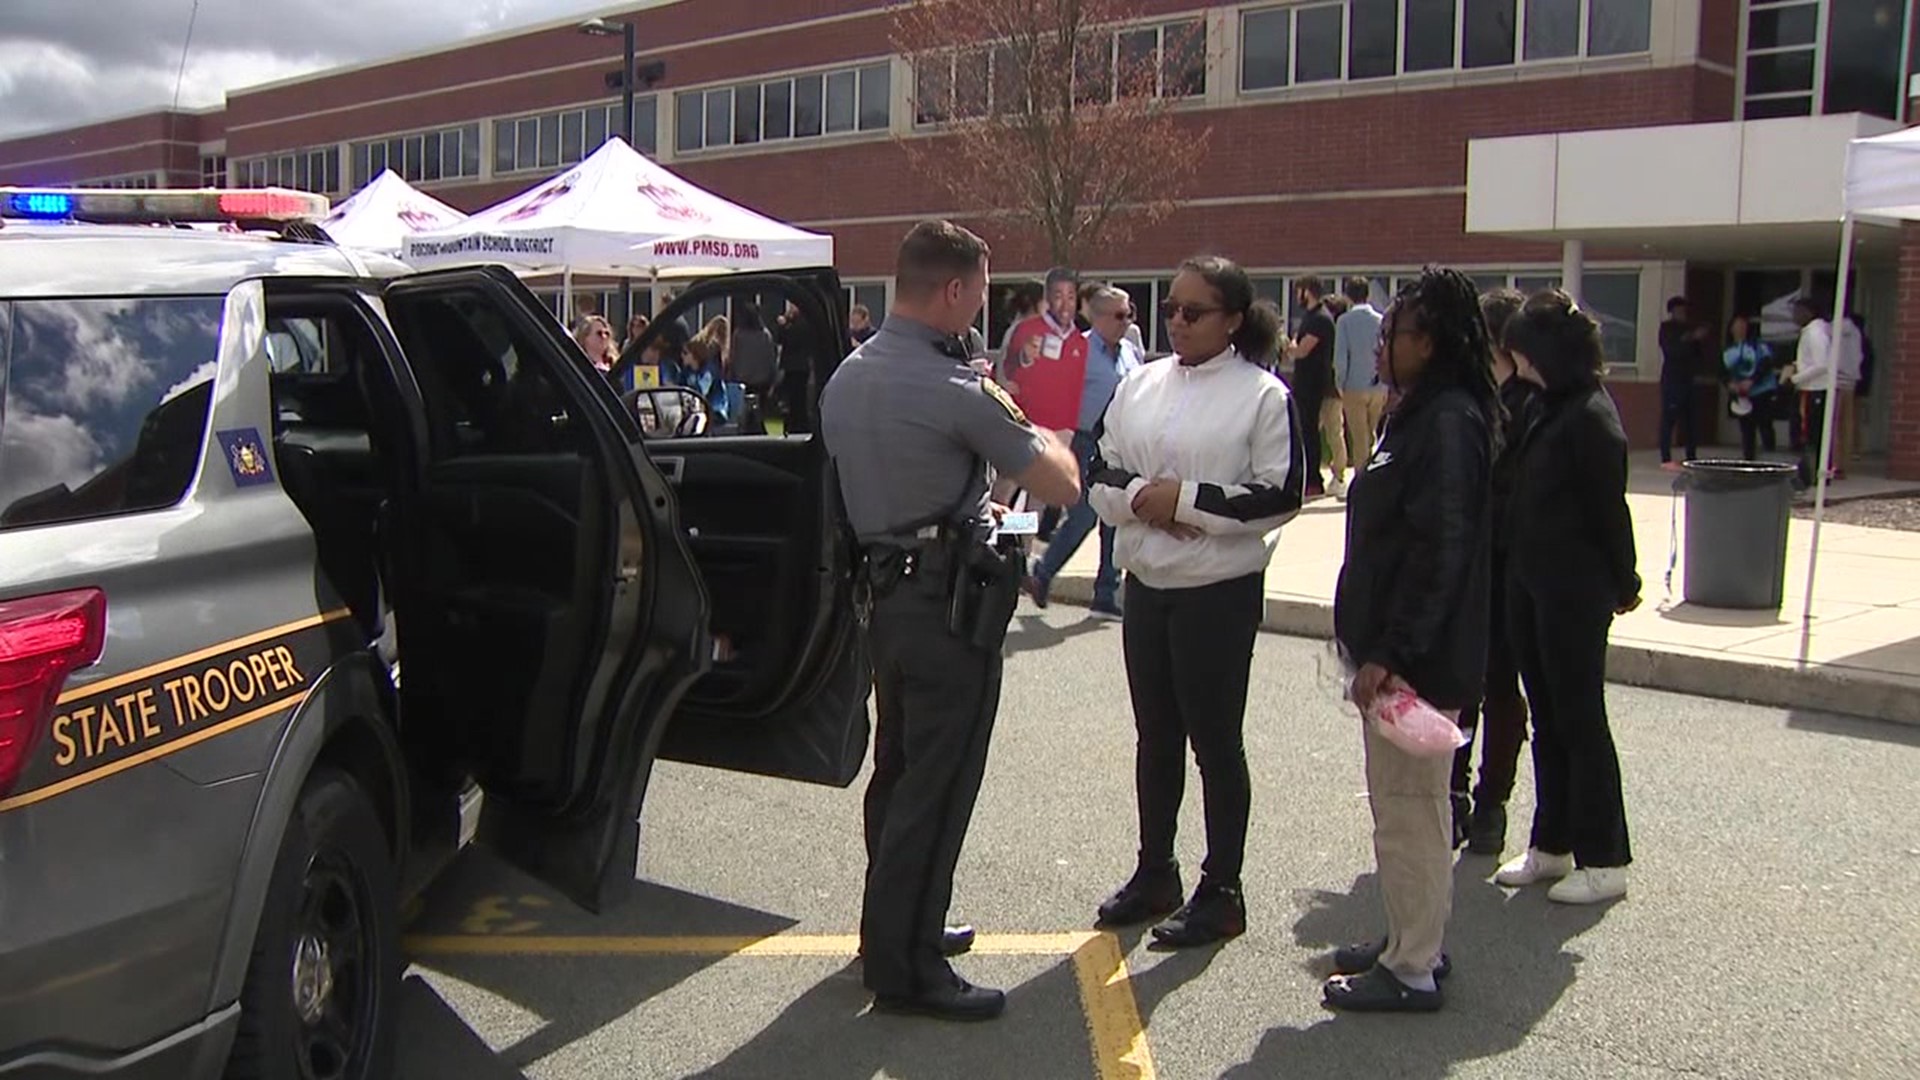 Students in one school district in the Poconos spent the day learning about safety with local first responders and law enforcement.